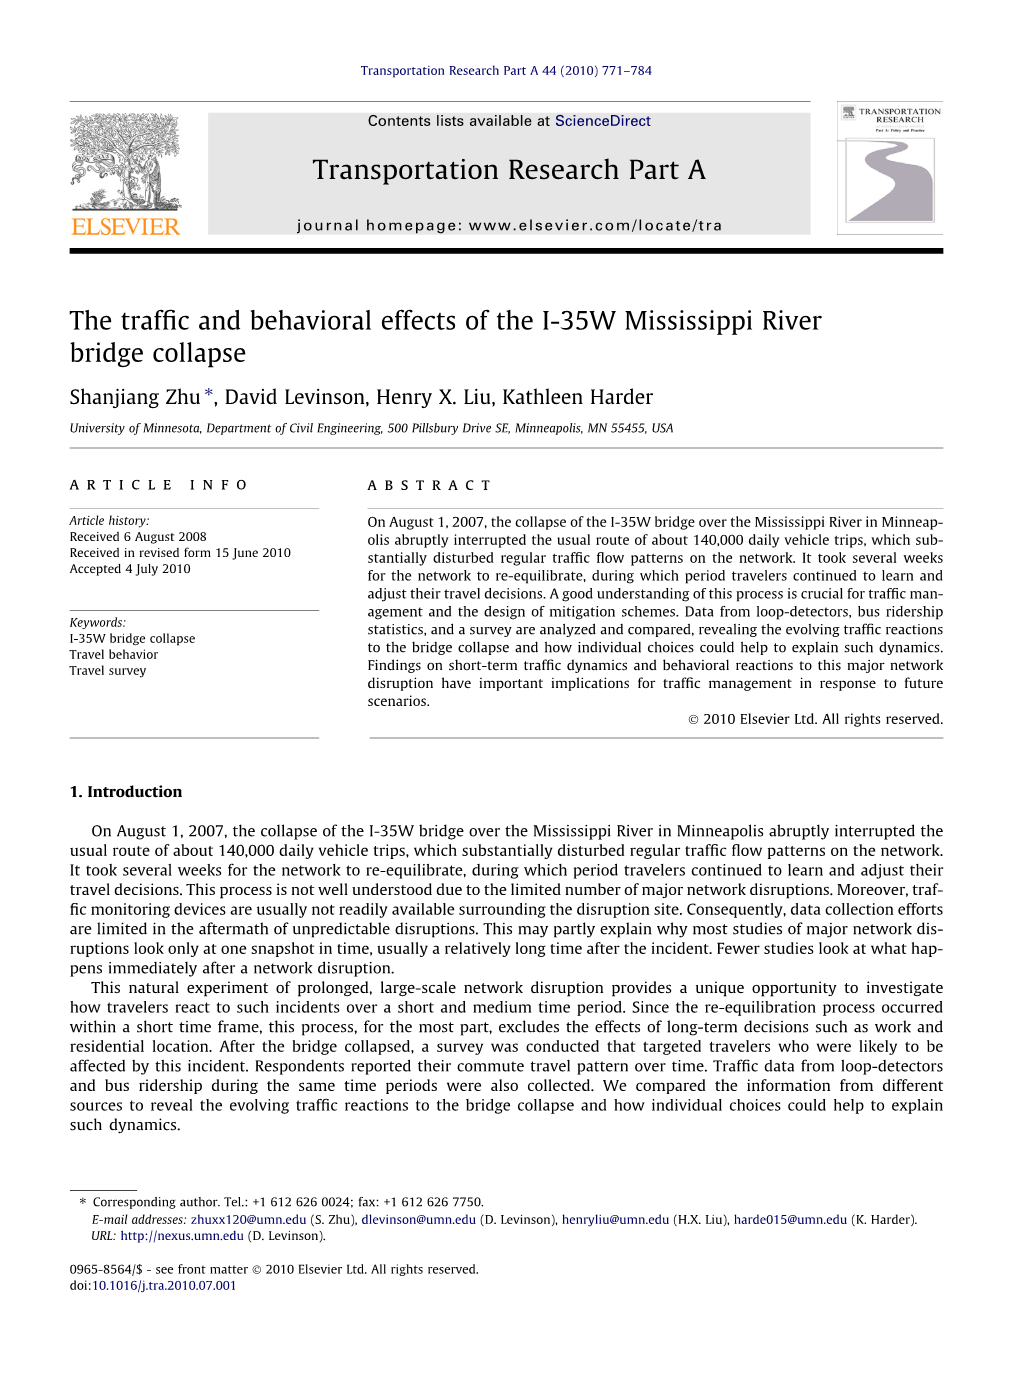 The Traffic and Behavioral Effects of the I-35W Mississippi River Bridge